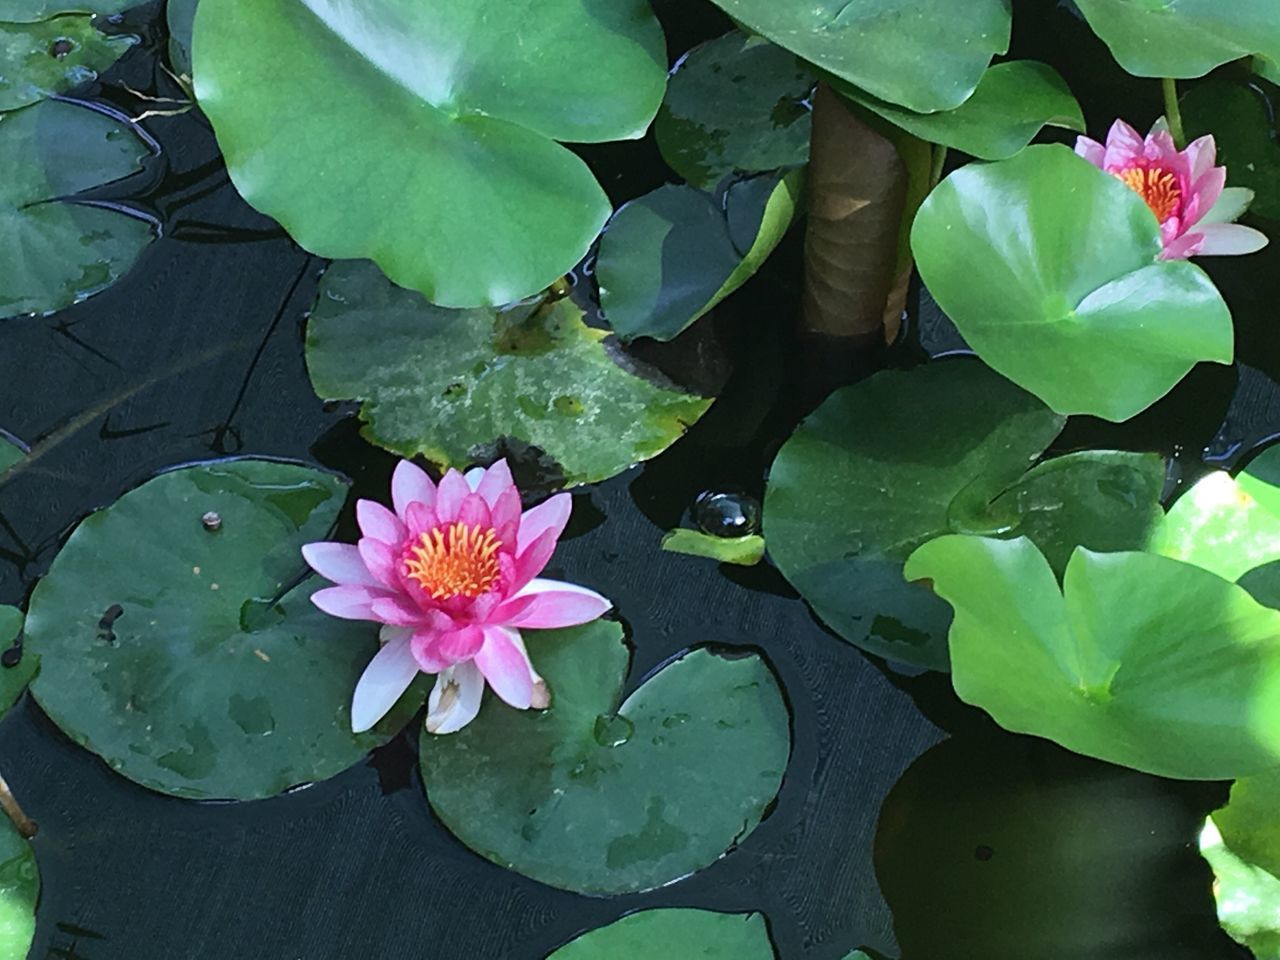 leaf, flower, water, freshness, nature, water lily, beauty in nature, lotus water lily, fragility, floating on water, pink color, growth, plant, lily pad, green color, petal, close-up, flower head, lotus, outdoors, no people, day